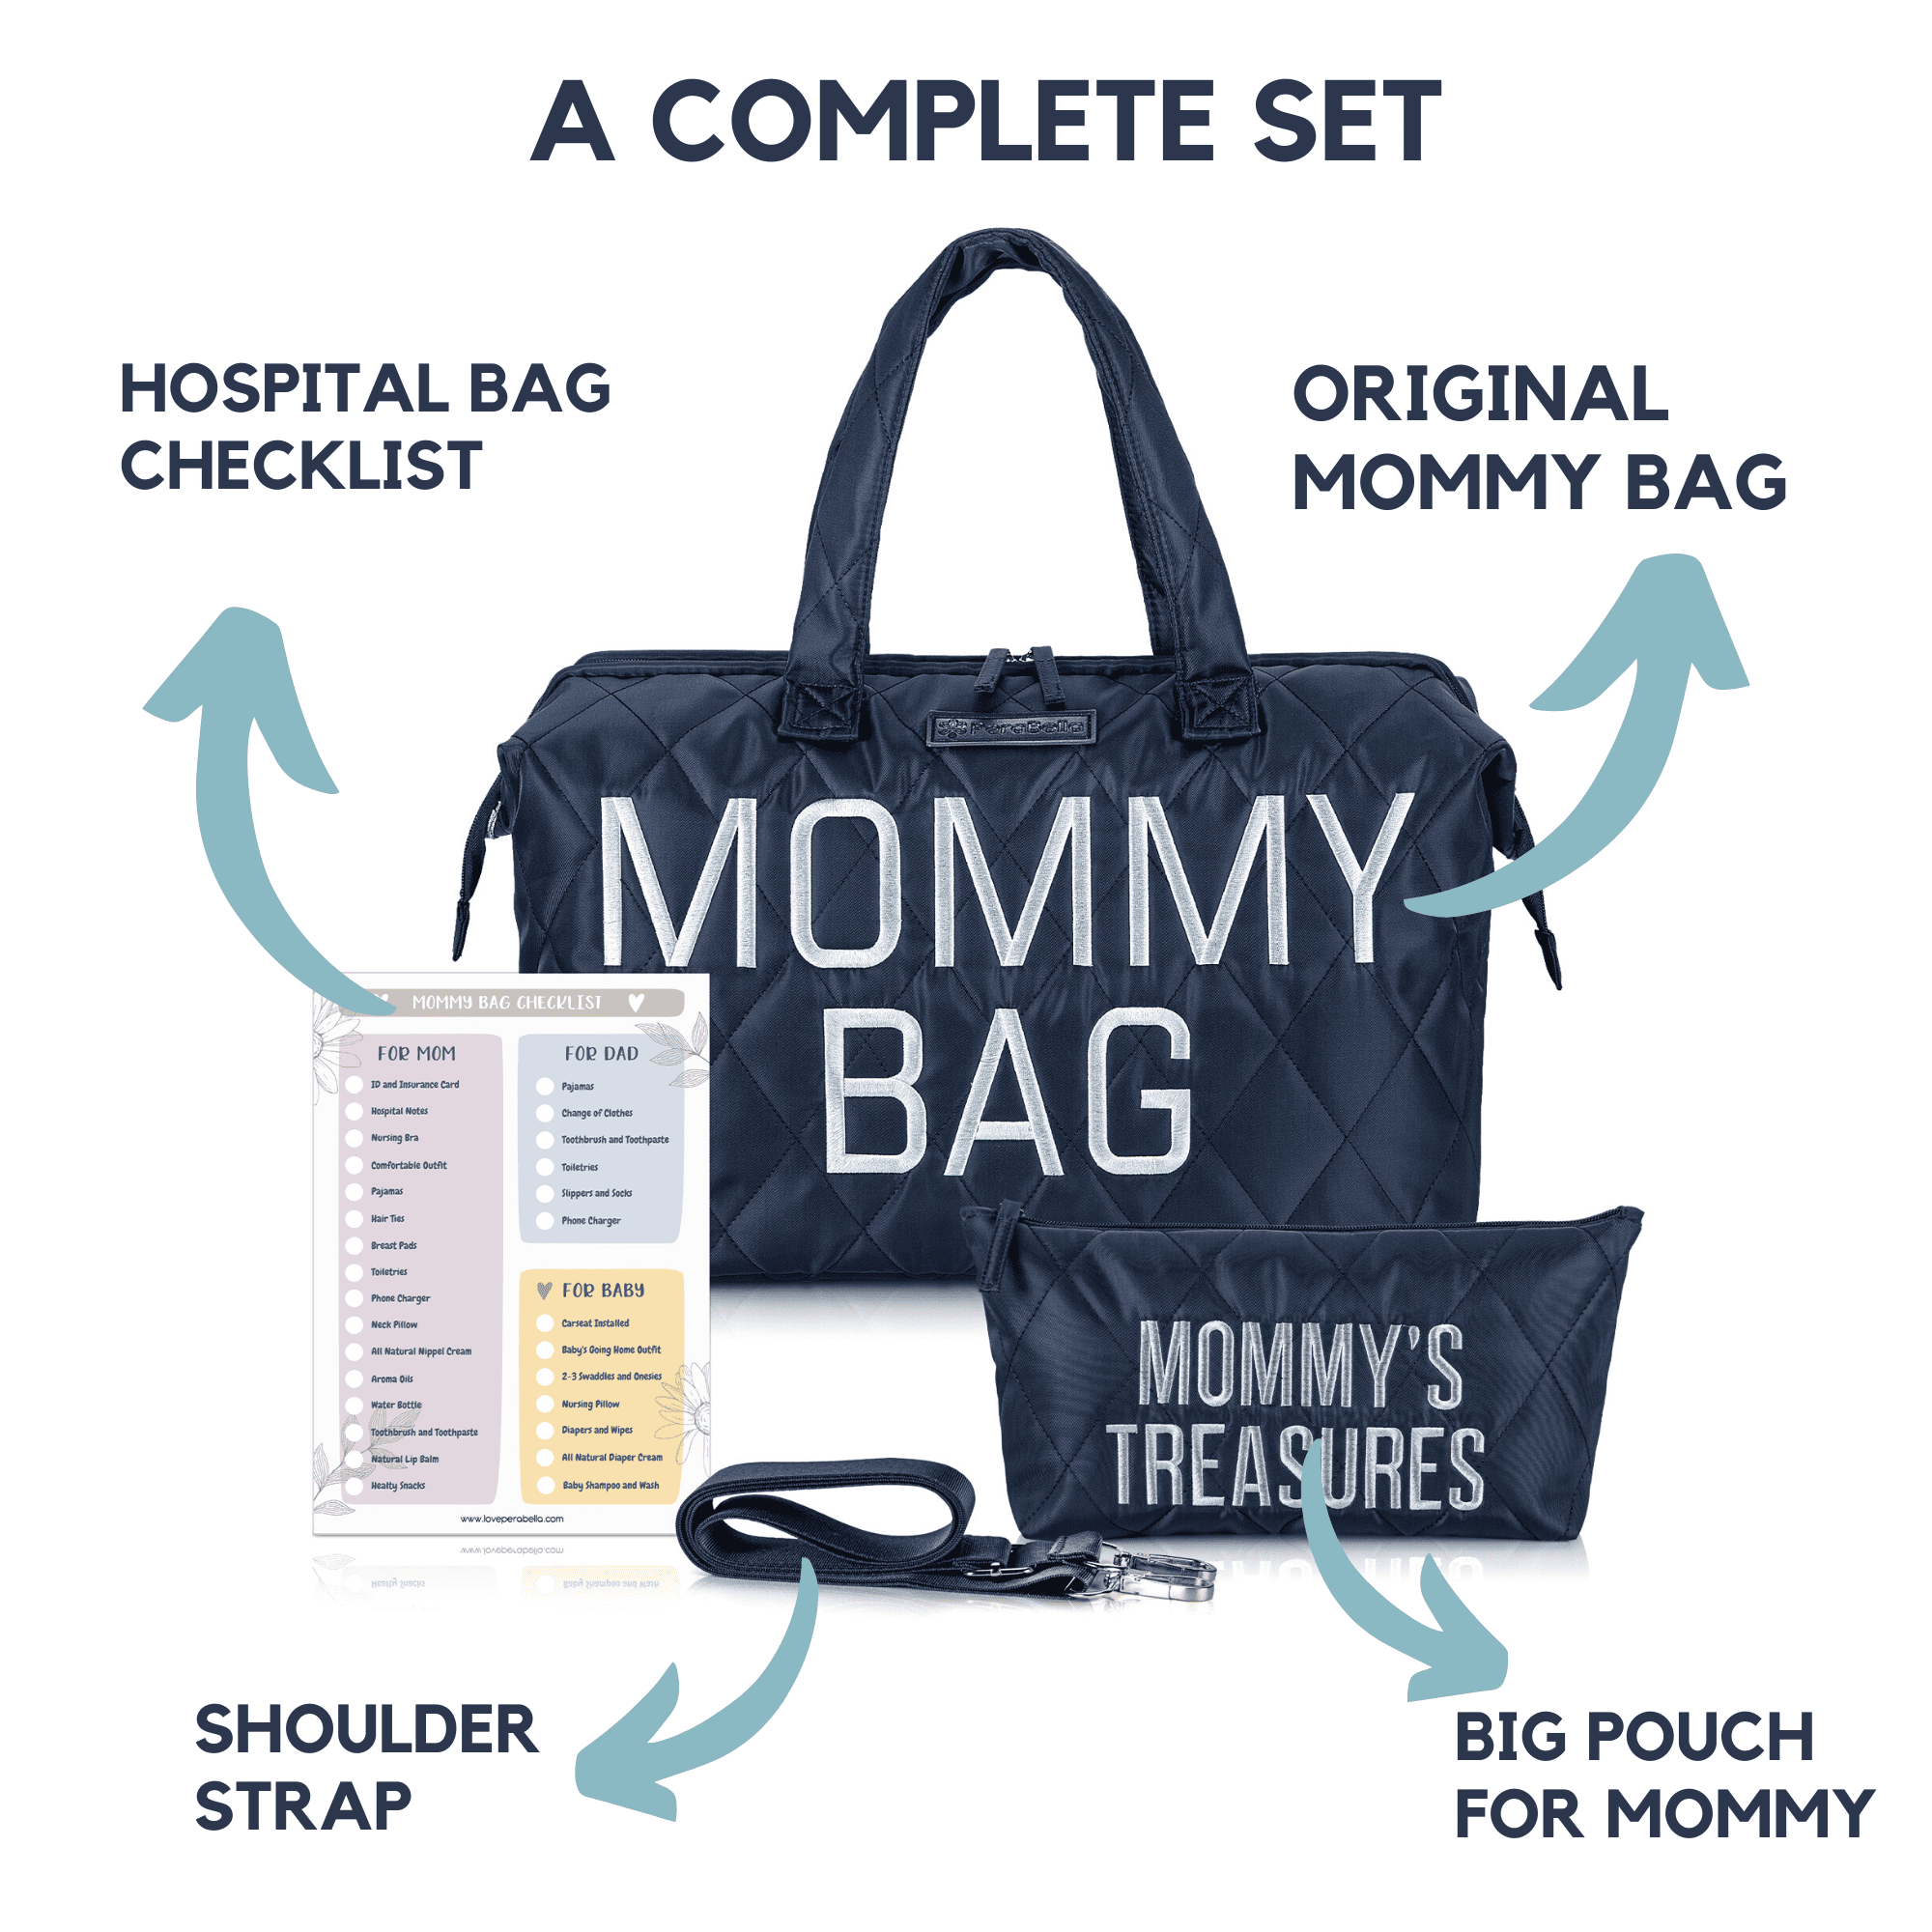 Perabella Mommy Bag for Hospital, Mommy Hospital Bags for Labor and Delivery, Mommy Bag Tote, Maternity Hospital Bag (Blue), Infant Unisex, Size: XL